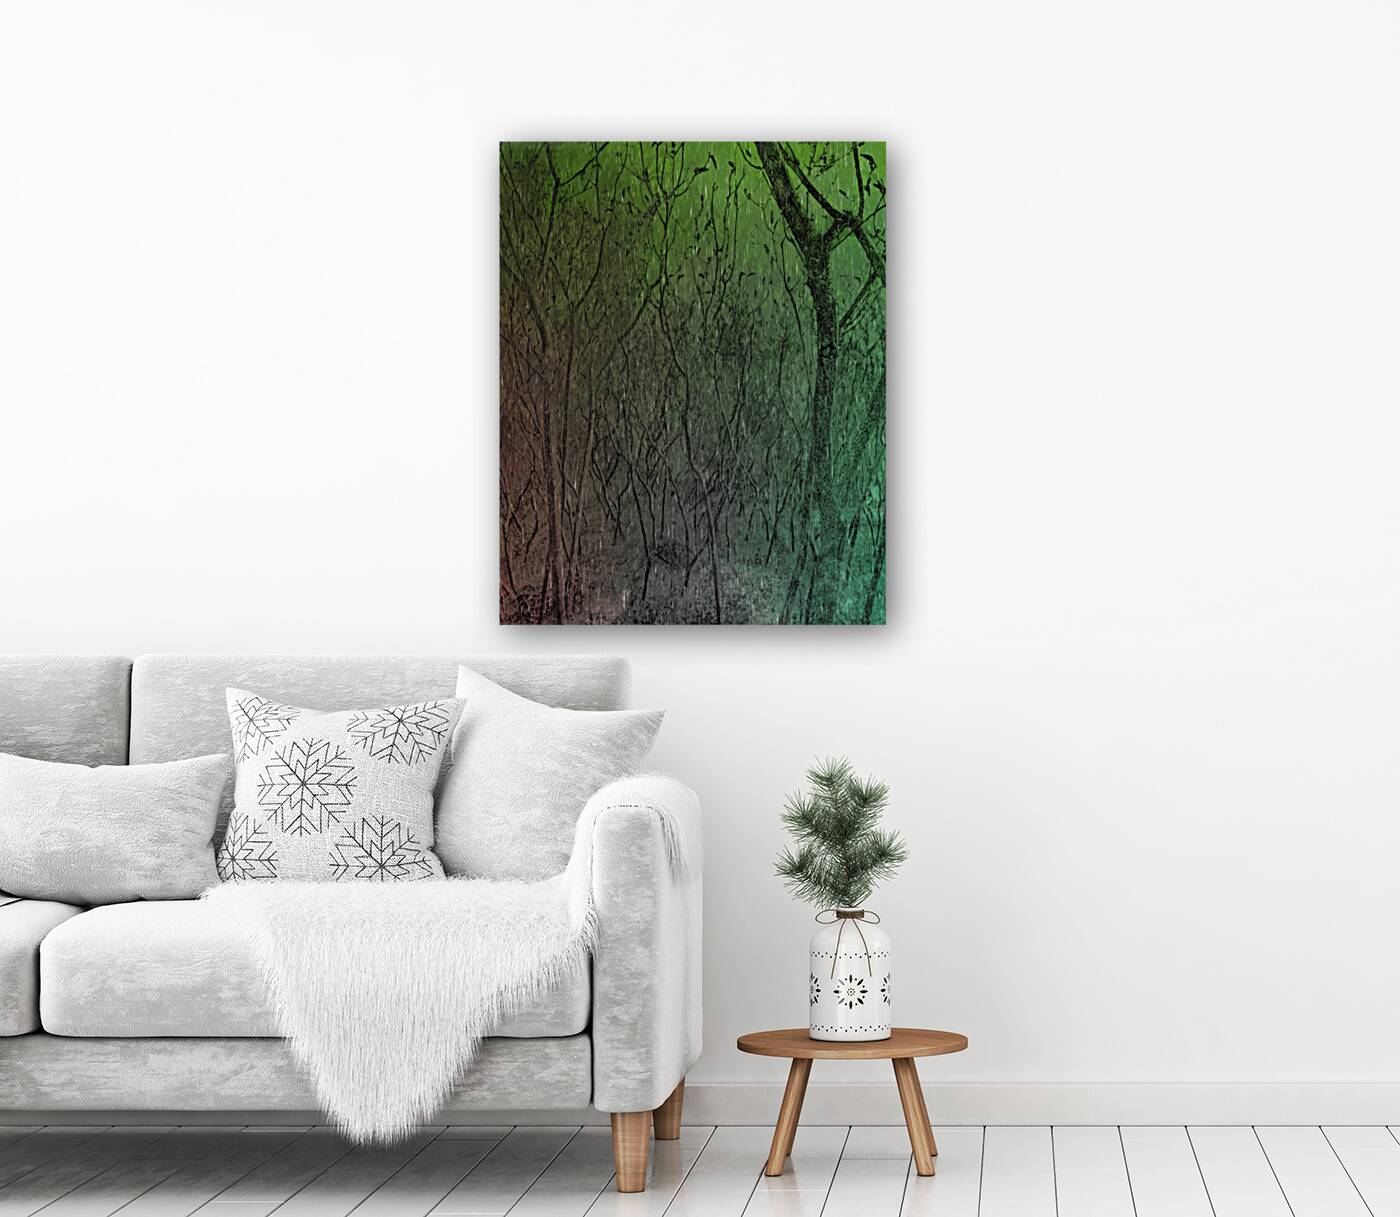 Whispers in the Grove by Le Boulanger - Giclée Stretched Canvas Print